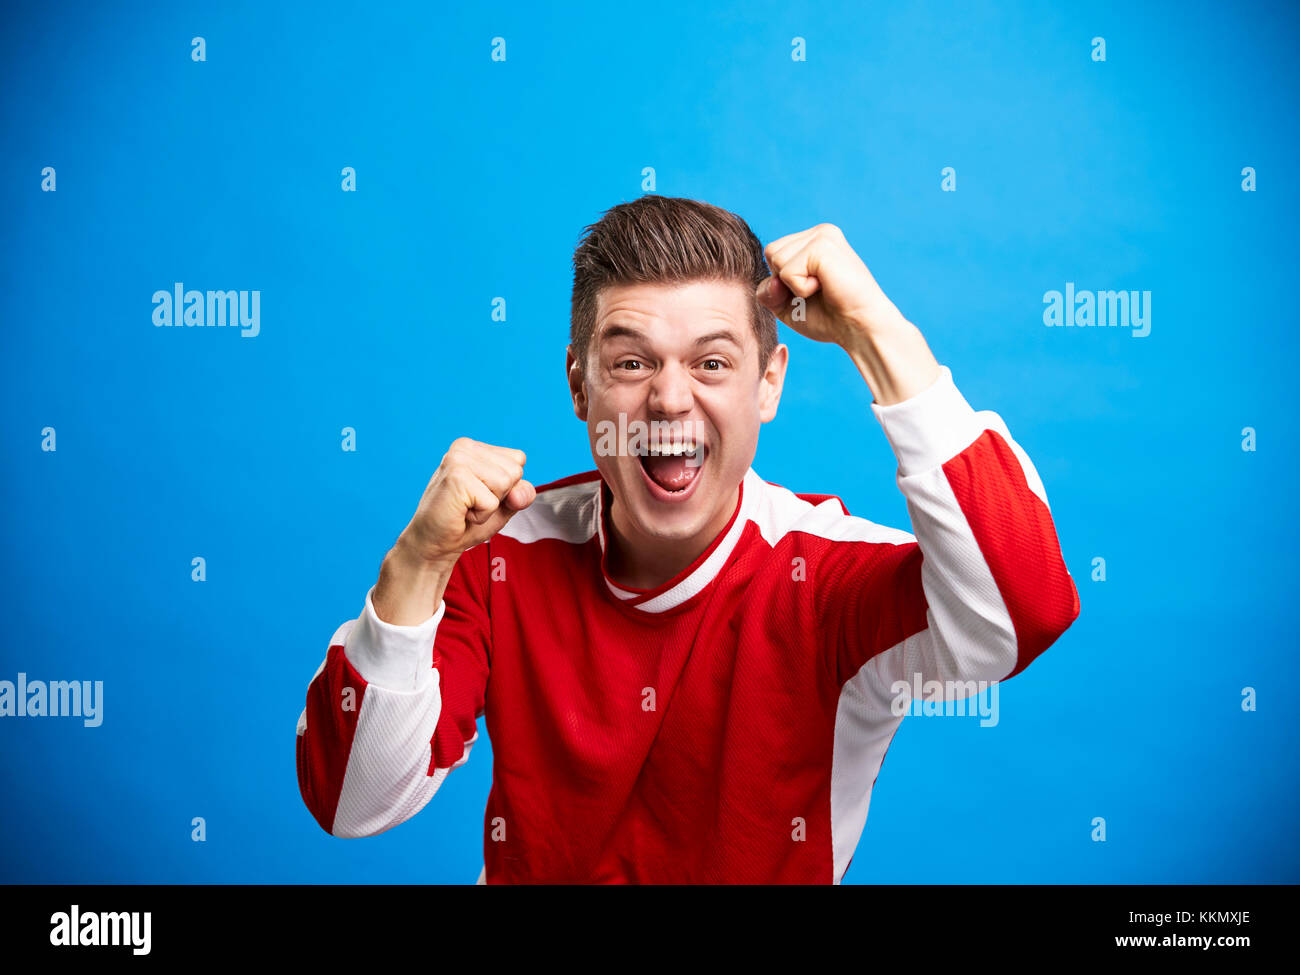 A young white male sports fan cheering and celebrating Stock Photo